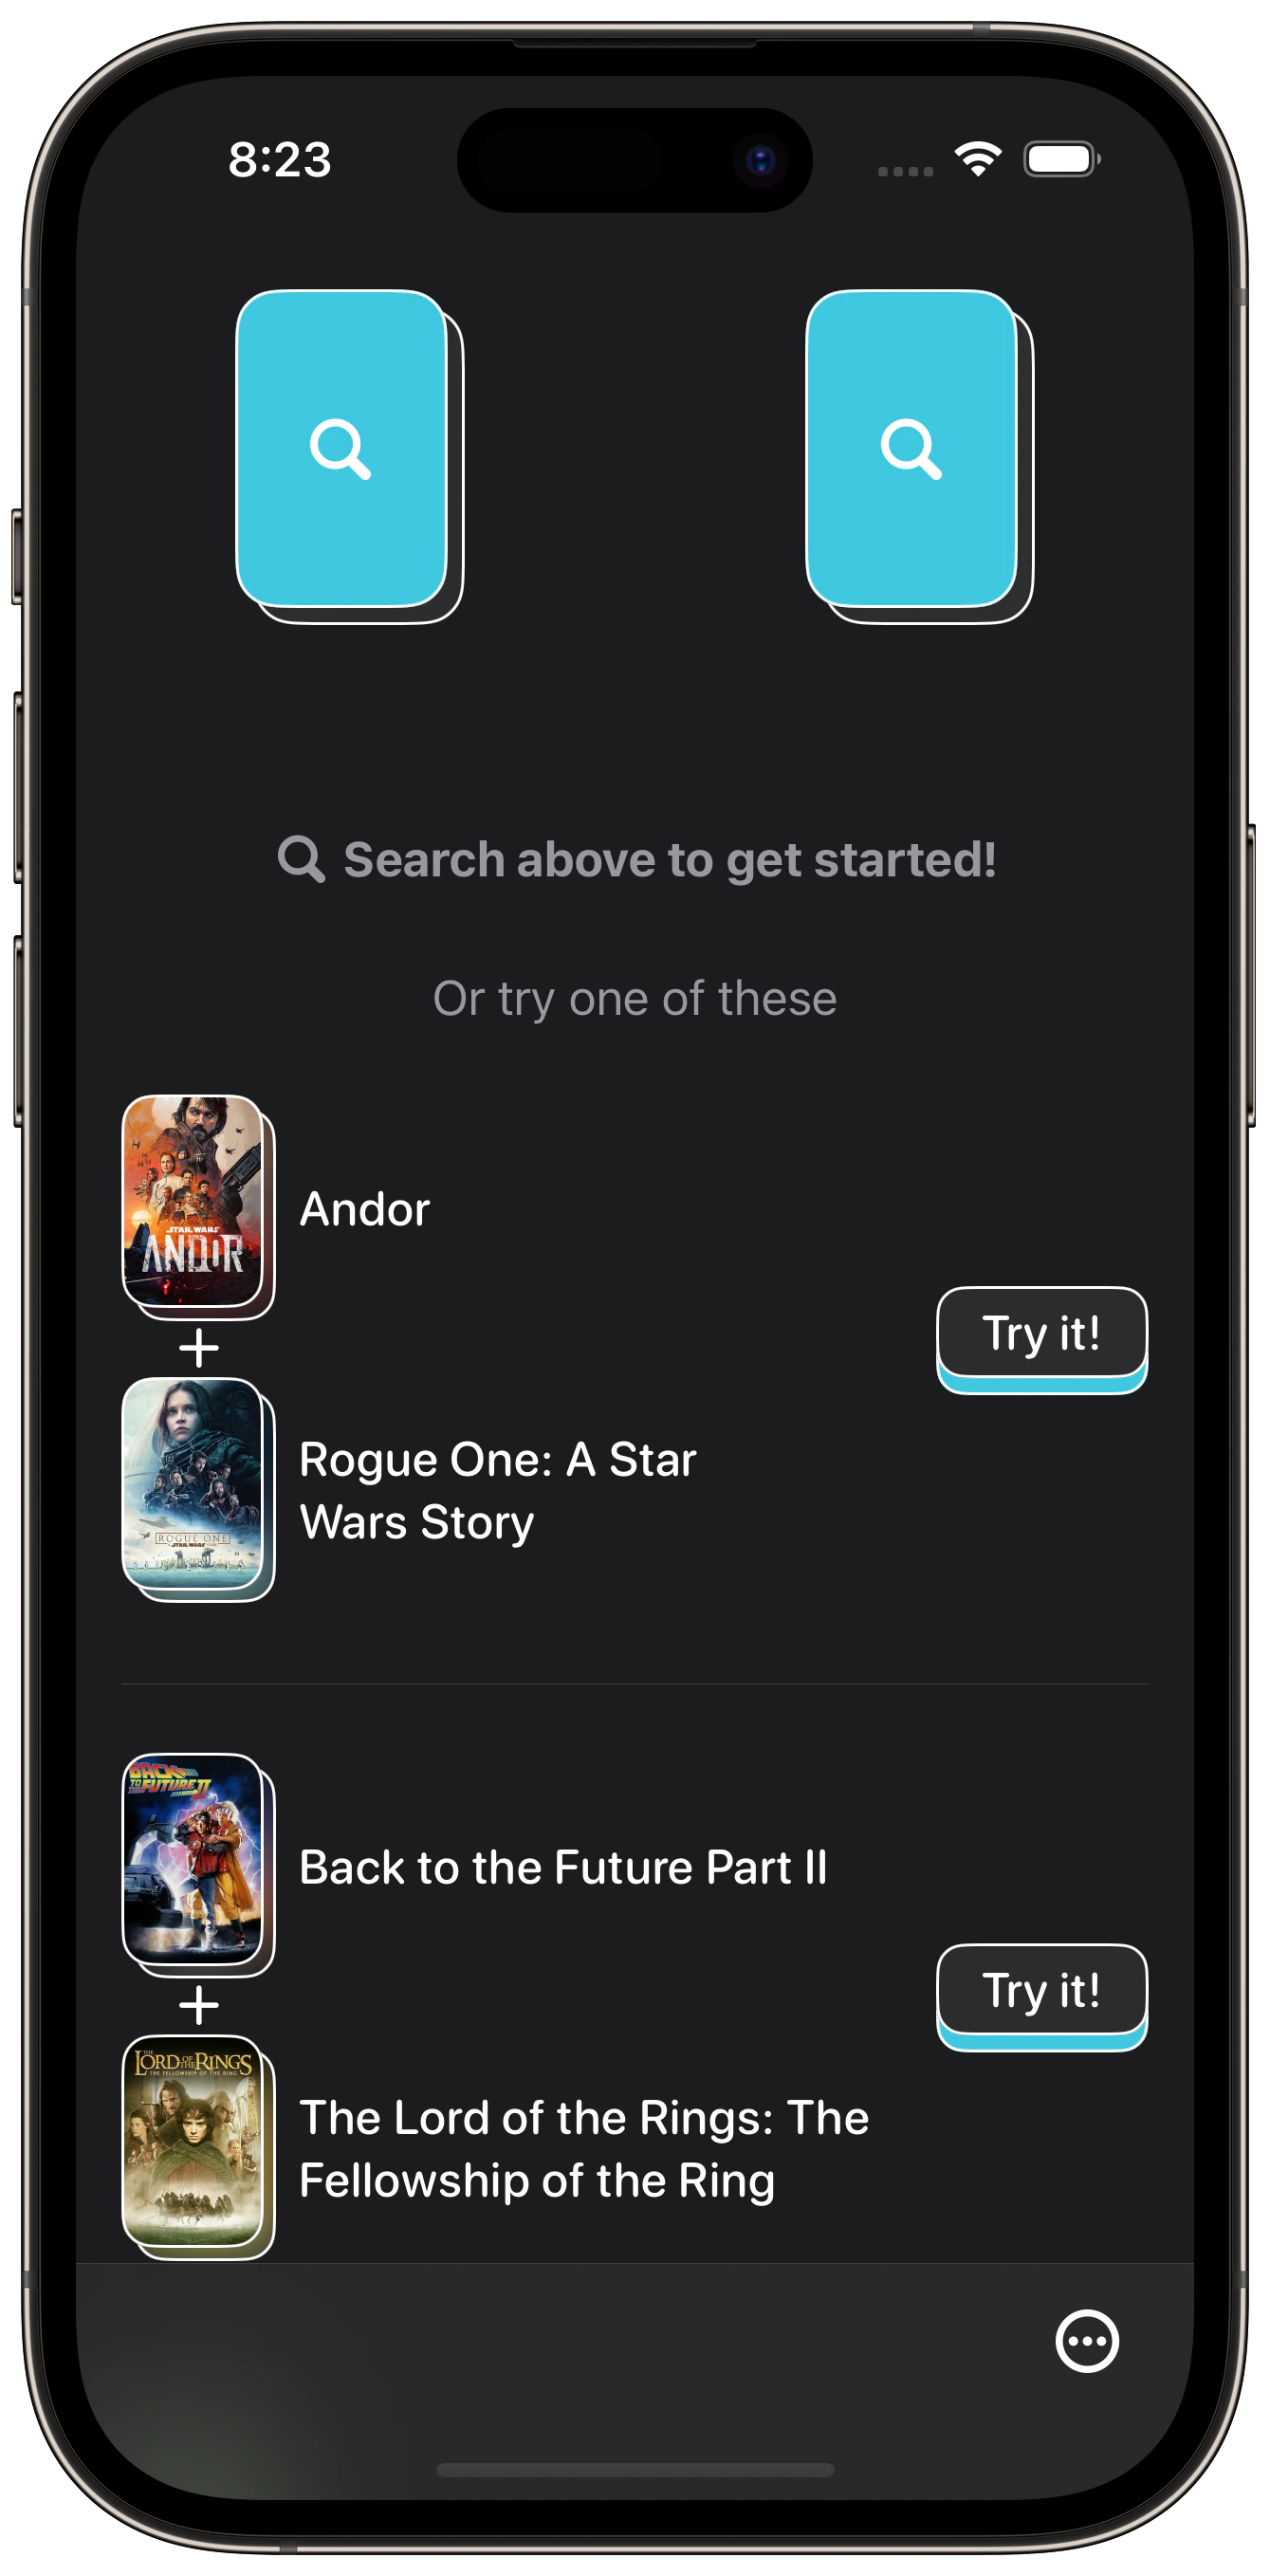 A screenshot of ScreenCred showing the app in light mode, with a dark gray background and thin white borders